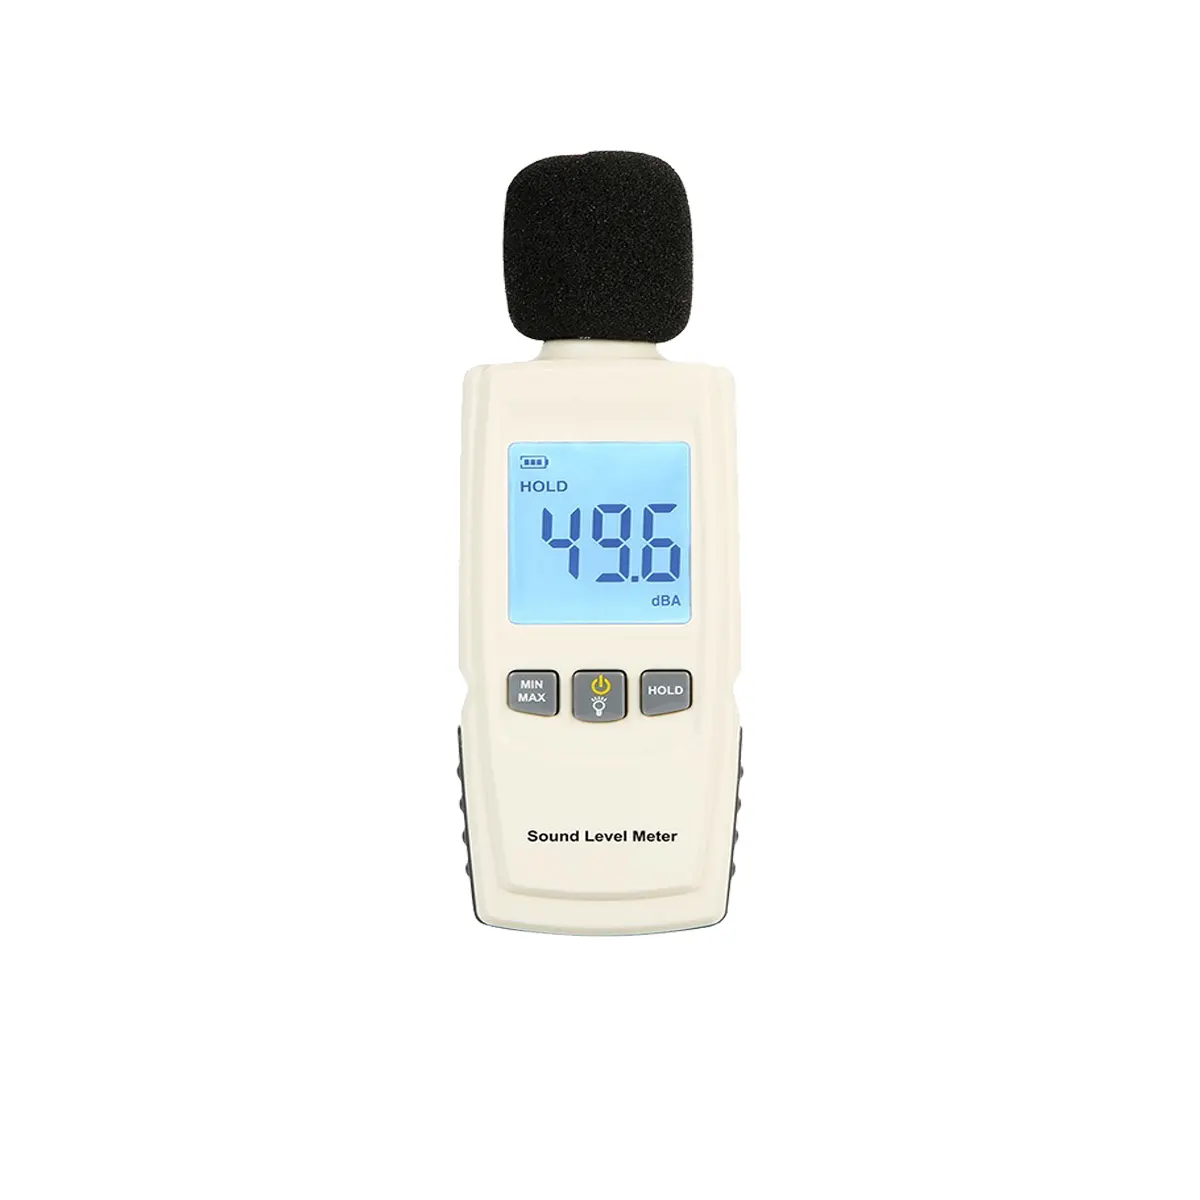 GM1352 Digital sound level meter noise tester 30-130dB in decibels LCD screen With backlight Accuracy up to 1.5dB